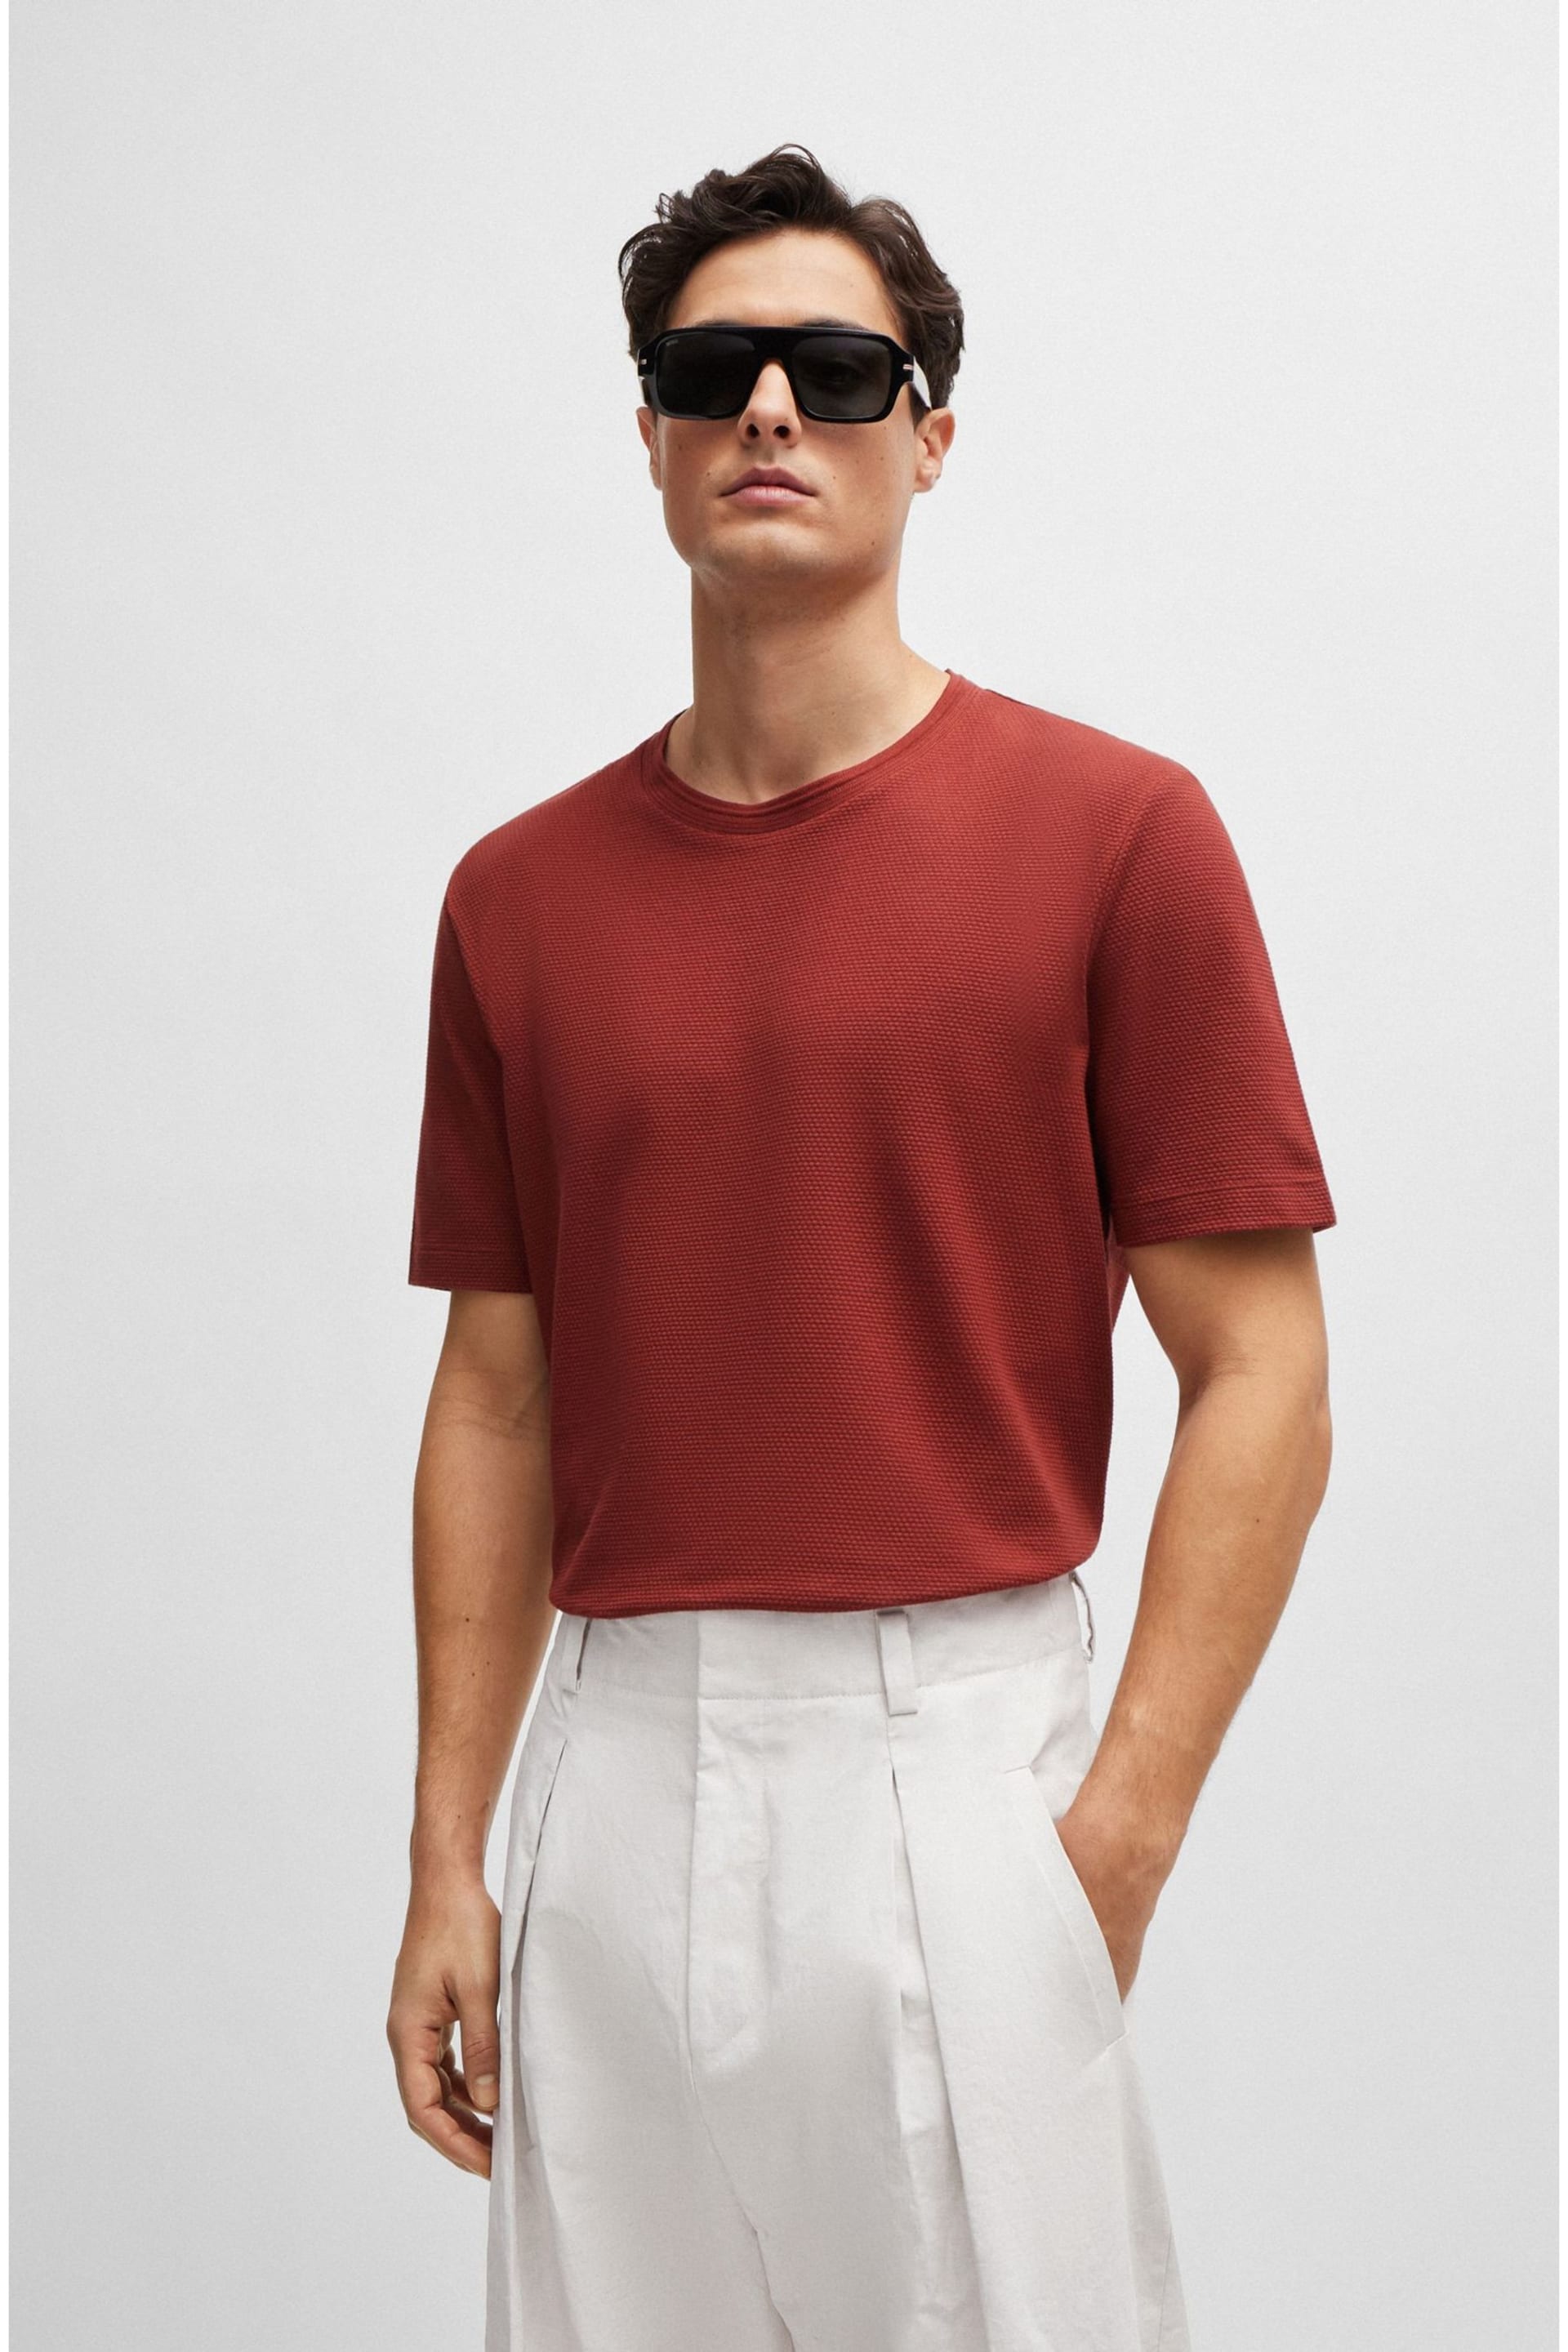 BOSS Red Cotton-Blend T-Shirt With Bubble-Jacquard Structure - Image 1 of 5